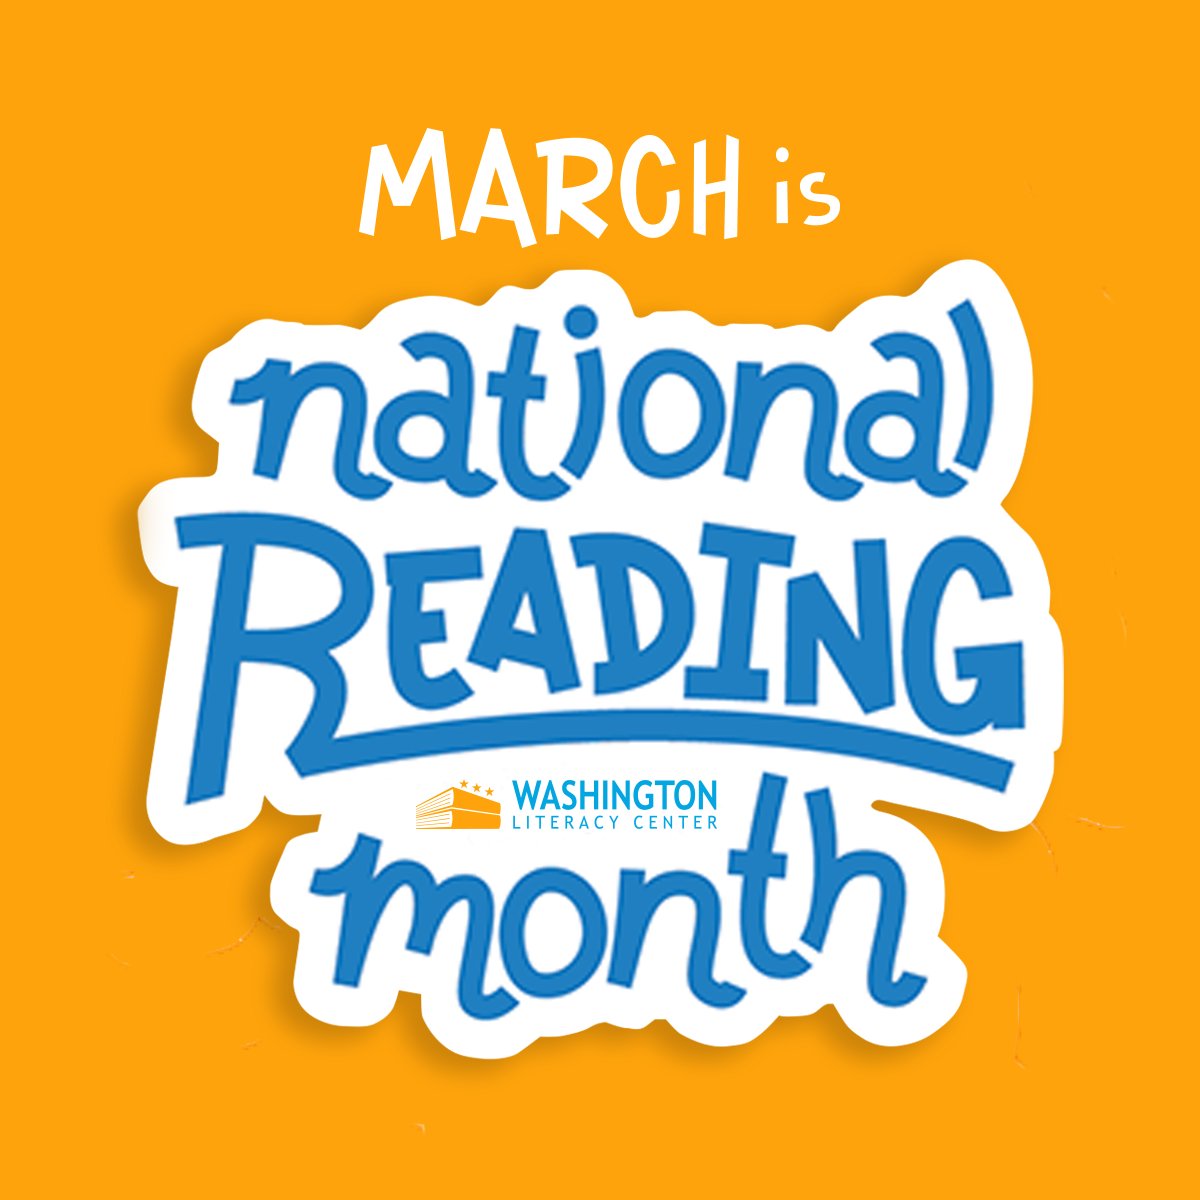 March is National Reading Month and WLC remains committed to supporting adult literacy in the DC Metro area. We help adults acquire the basic reading skills they need to help them become productive workers, family members, and citizens. What are you reading this month?